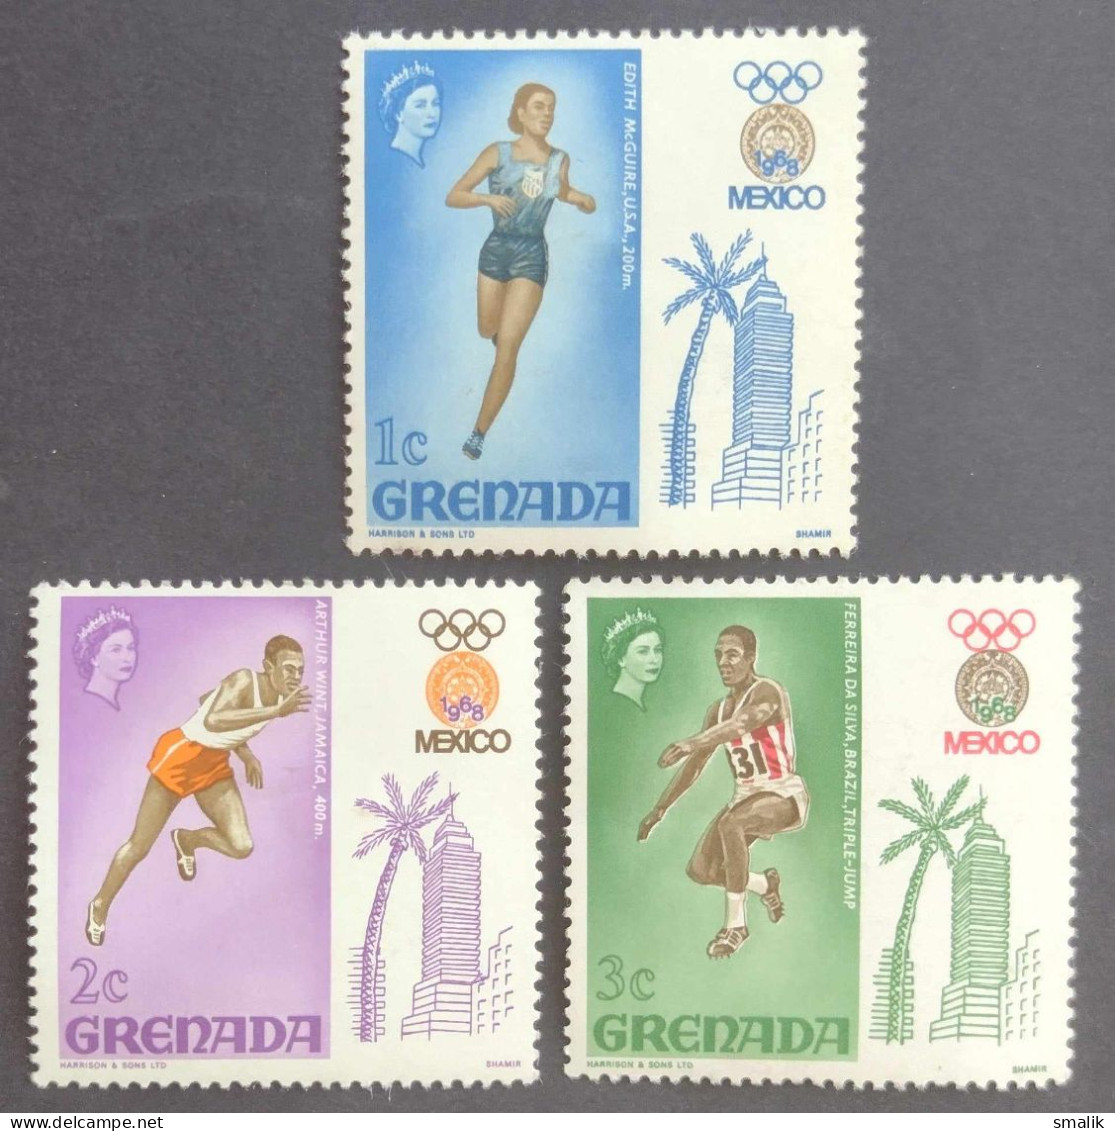 GRENADA (Former British Colony) 1968 - Mexico Olympic Games, 3 Stamps, MH Mint Slightly Hinged - Grenada (...-1974)